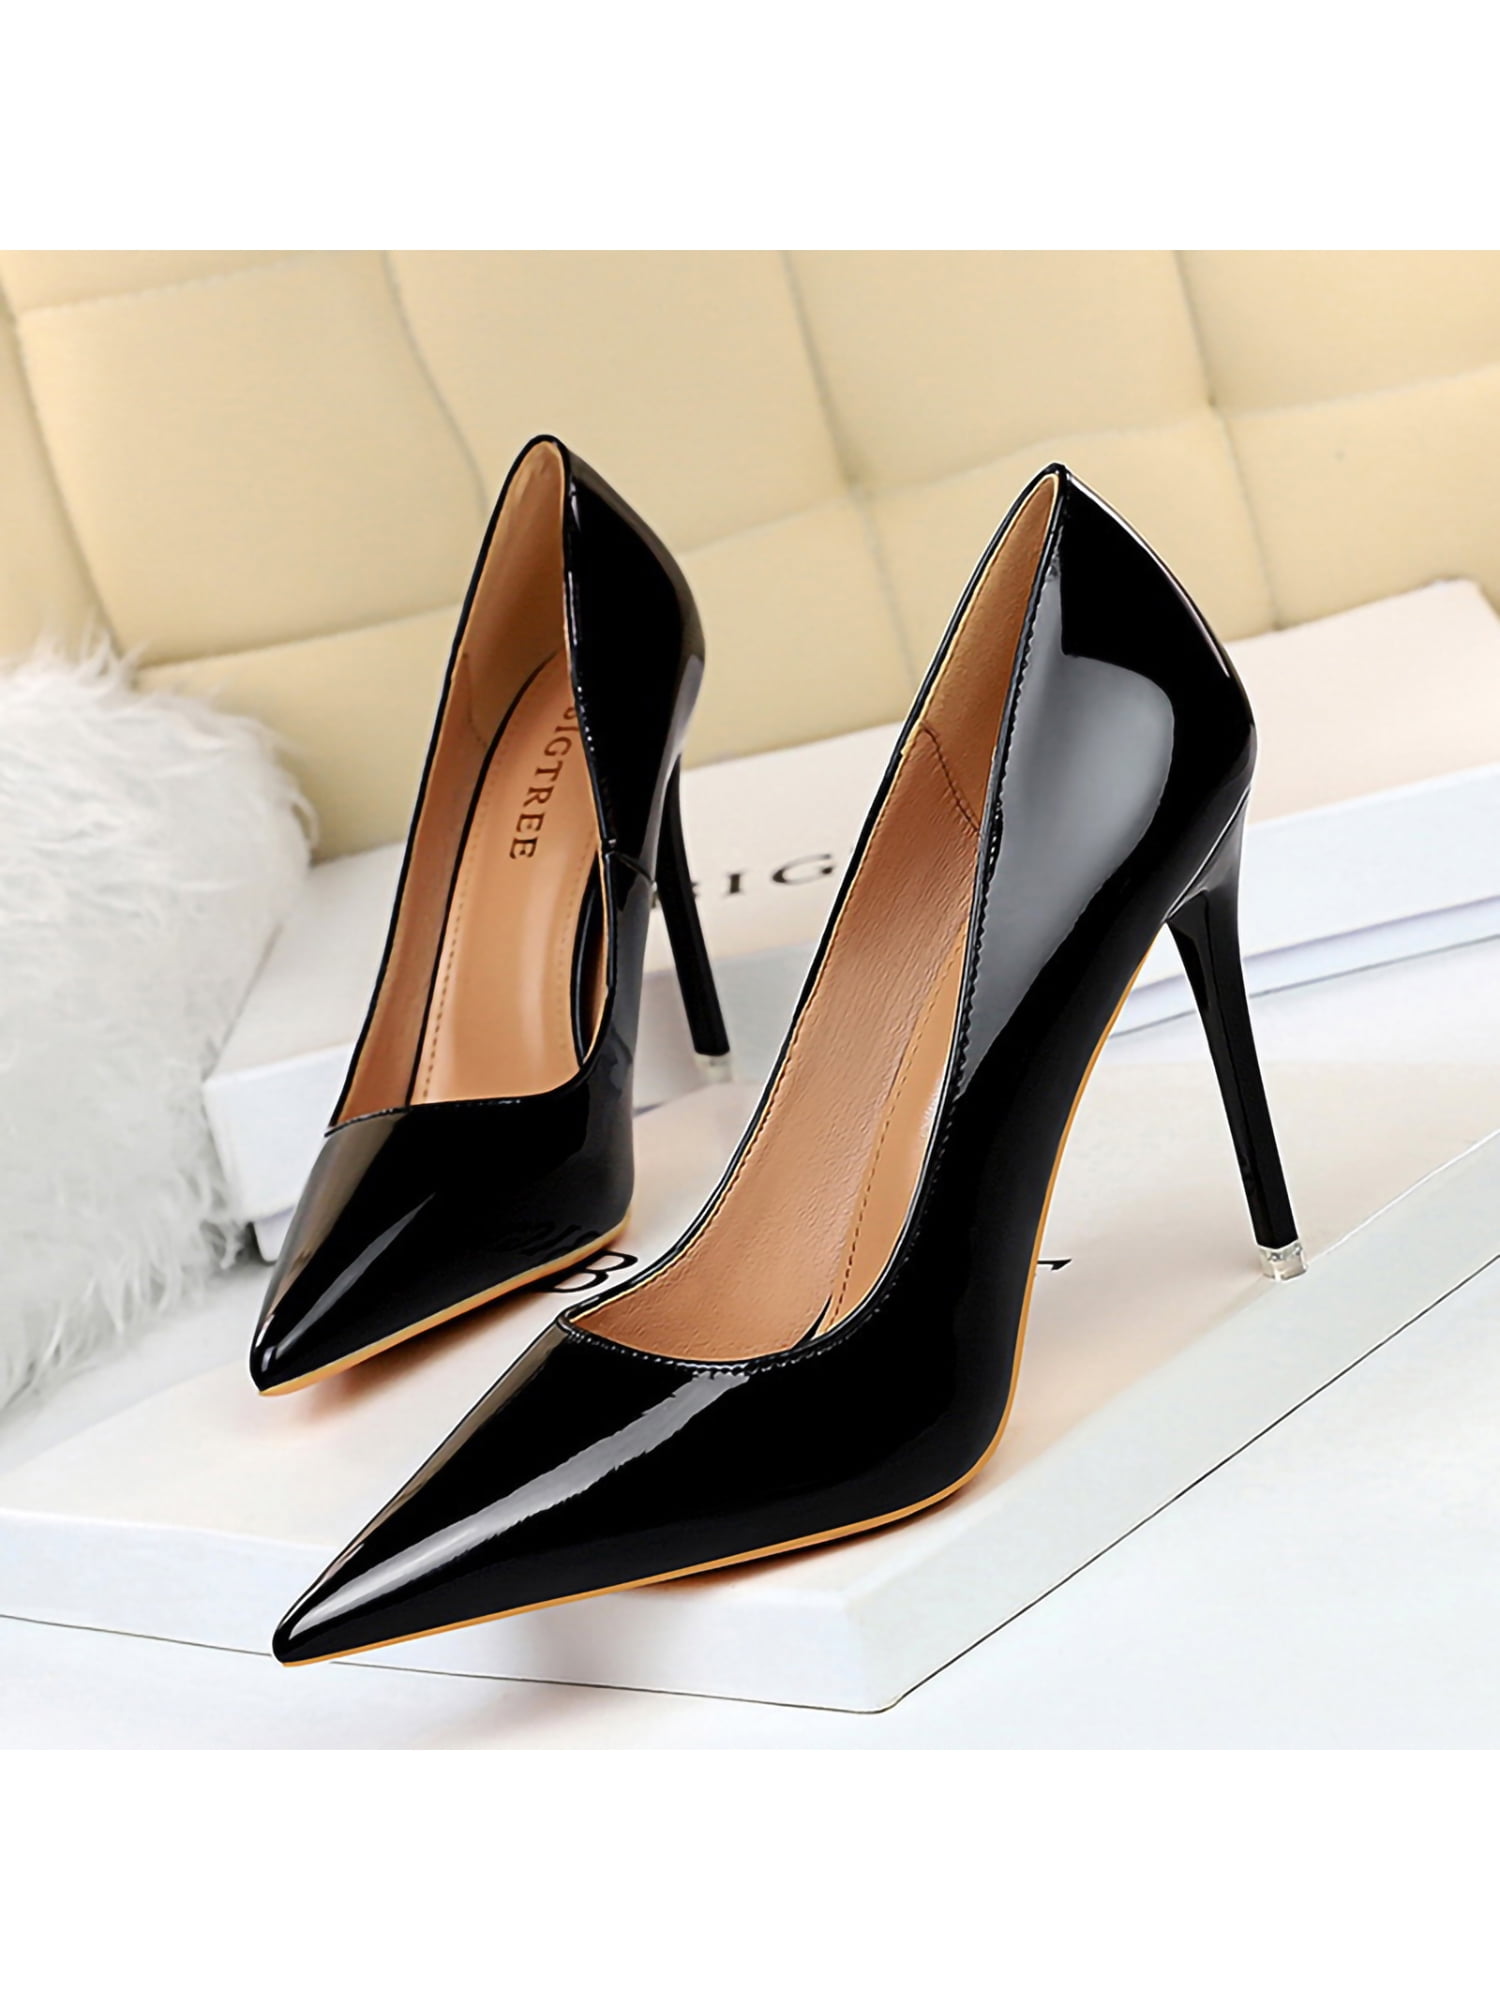 Ankle Strap Chunky Heeled Sandals | Black ankle strap heels, Prom shoes  black, Simple black heels